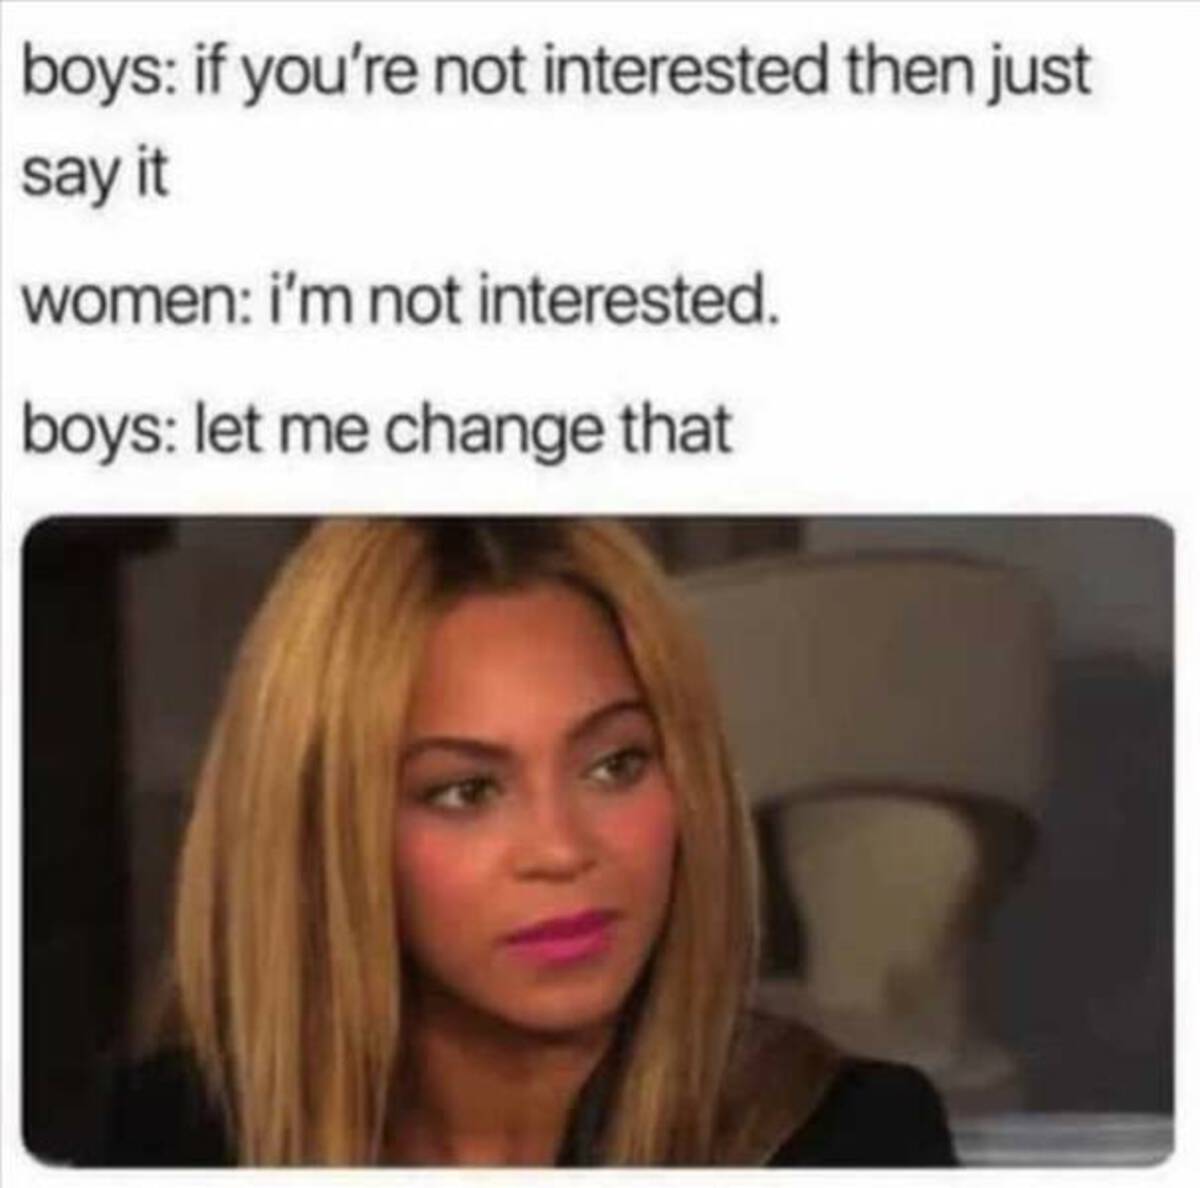 if you re not interested just say - boys if you're not interested then just say it women i'm not interested. boys let me change that